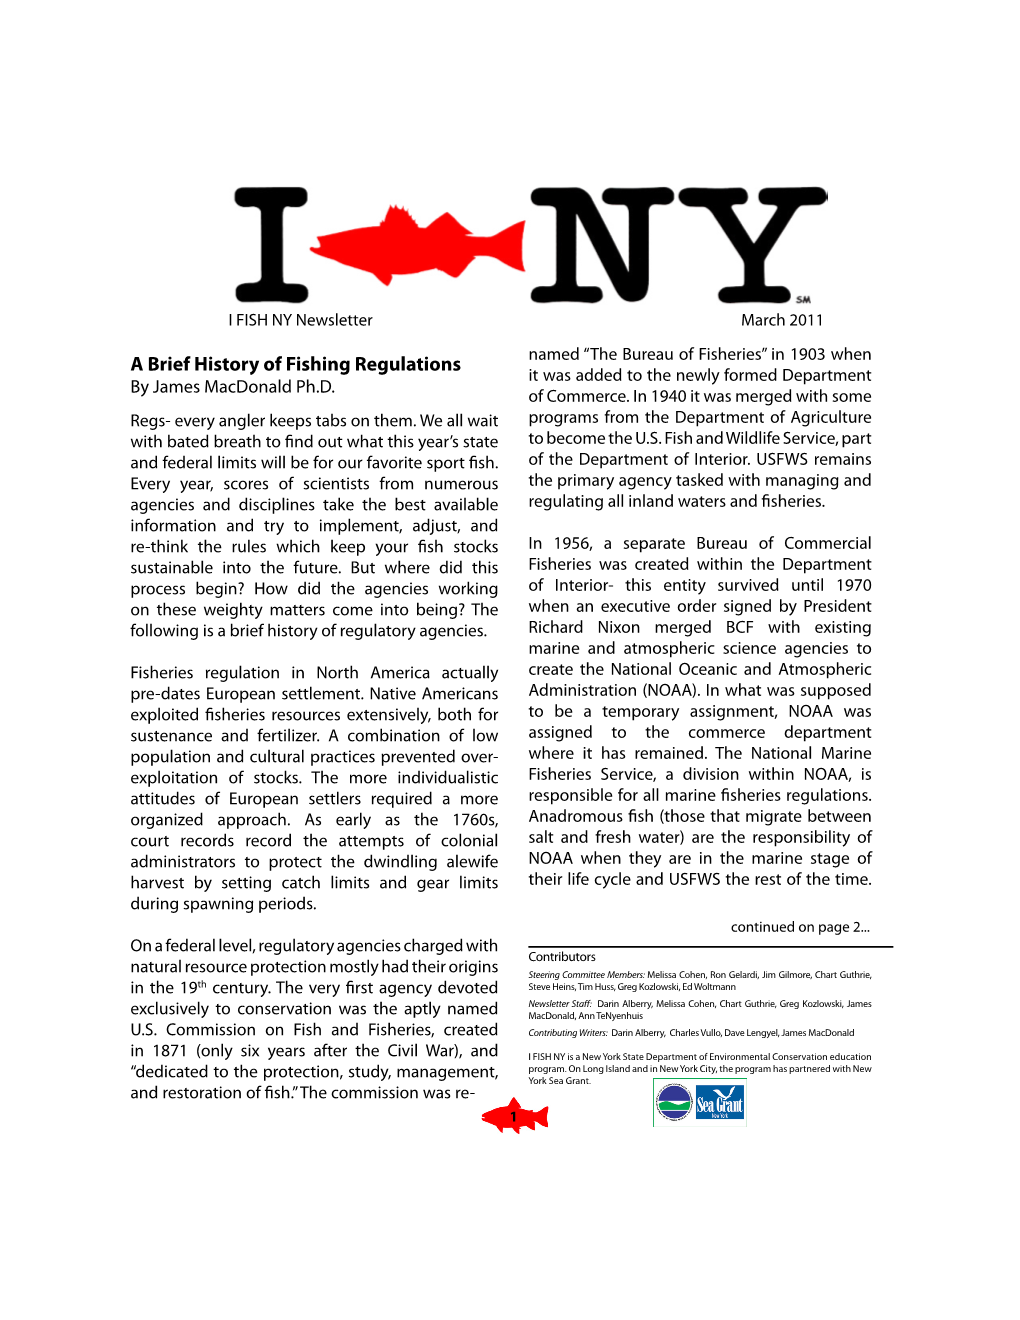 A Brief History of Fishing Regulations It Was Added to the Newly Formed Department by James Macdonald Ph.D